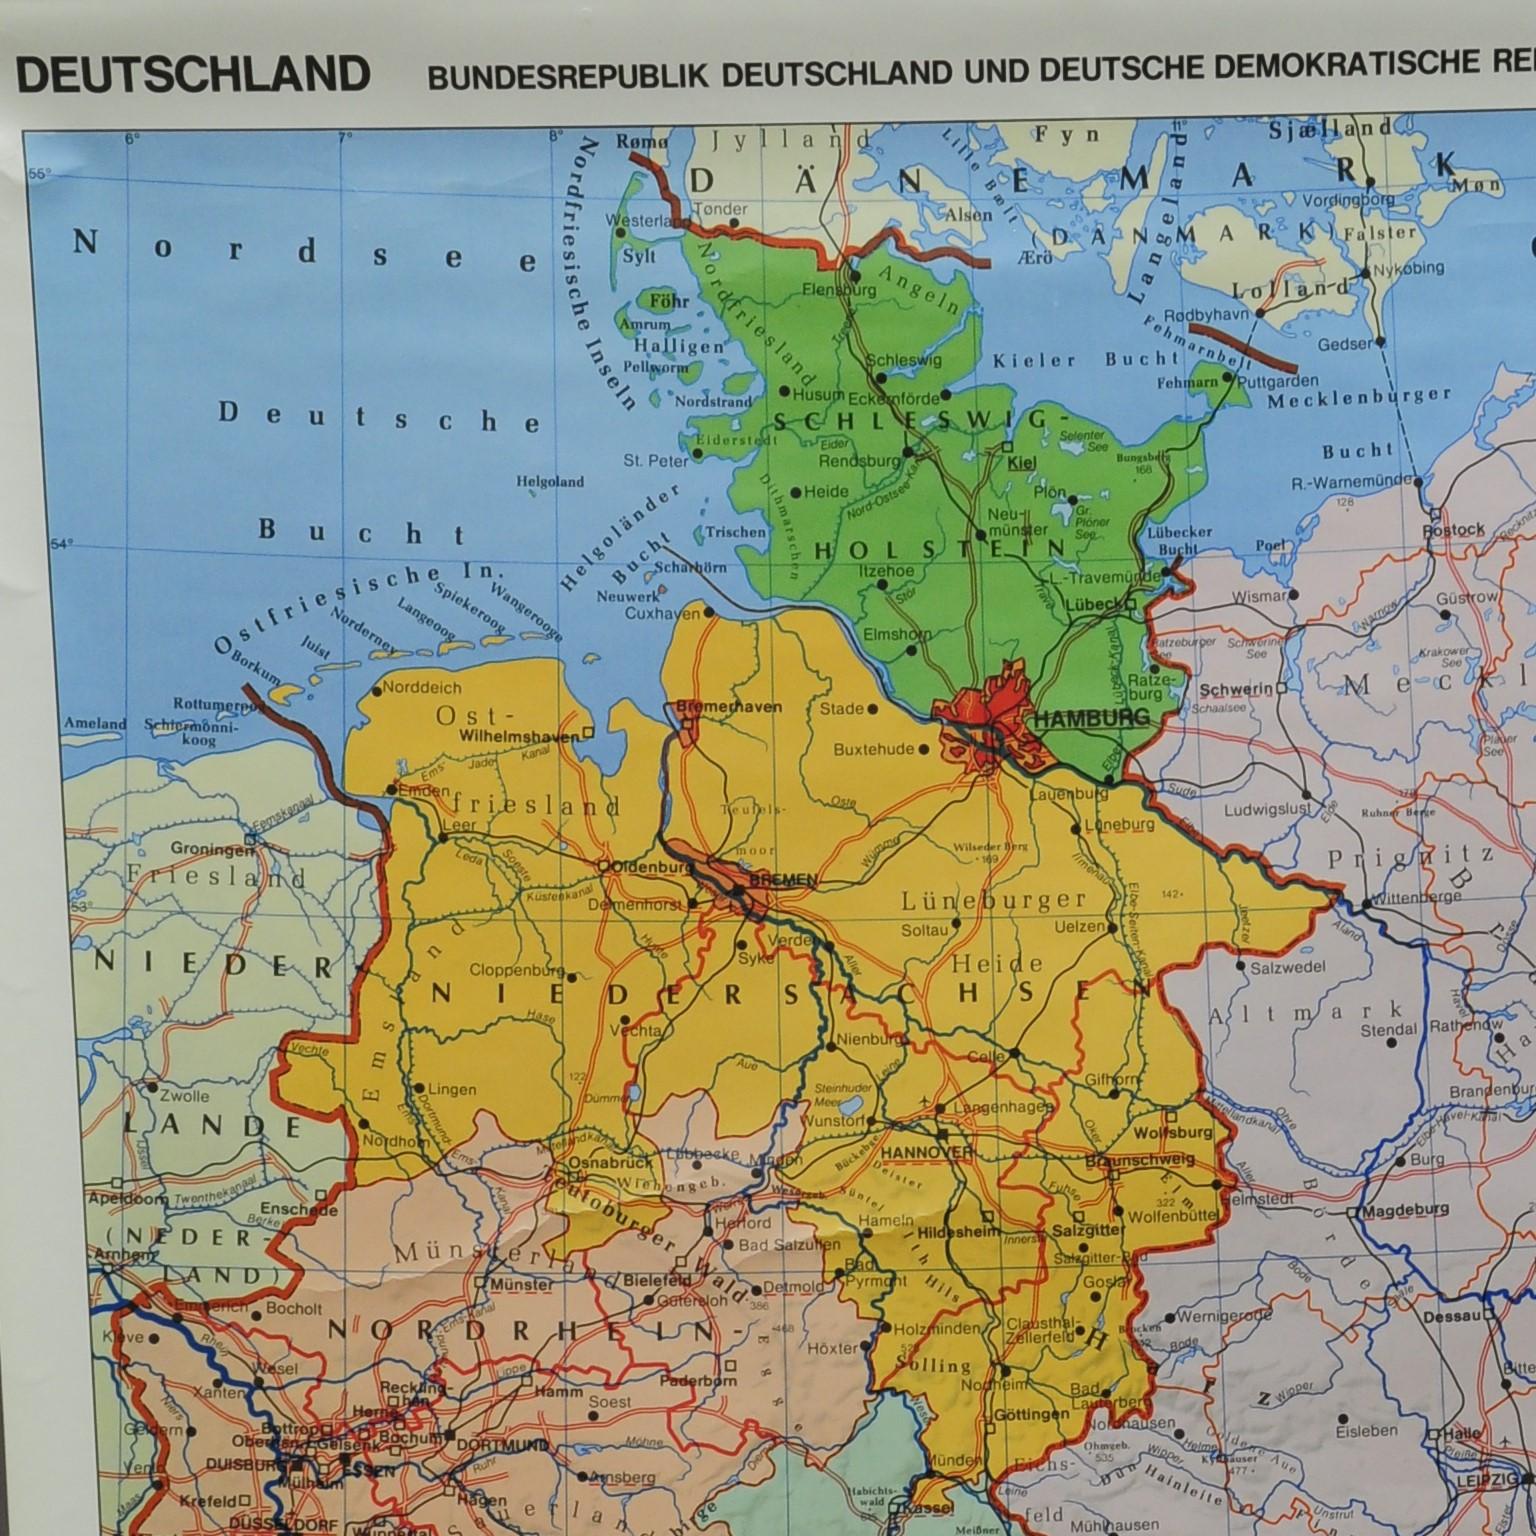 A classical rollable vintage wall chart illustrating a map of Germany (Federal Republic of Germany and German Democratic Republic). published by the Wenschow Reliefkarte. colorful print on paper reinforced with canvas. 
Measurements:
Width 97cm